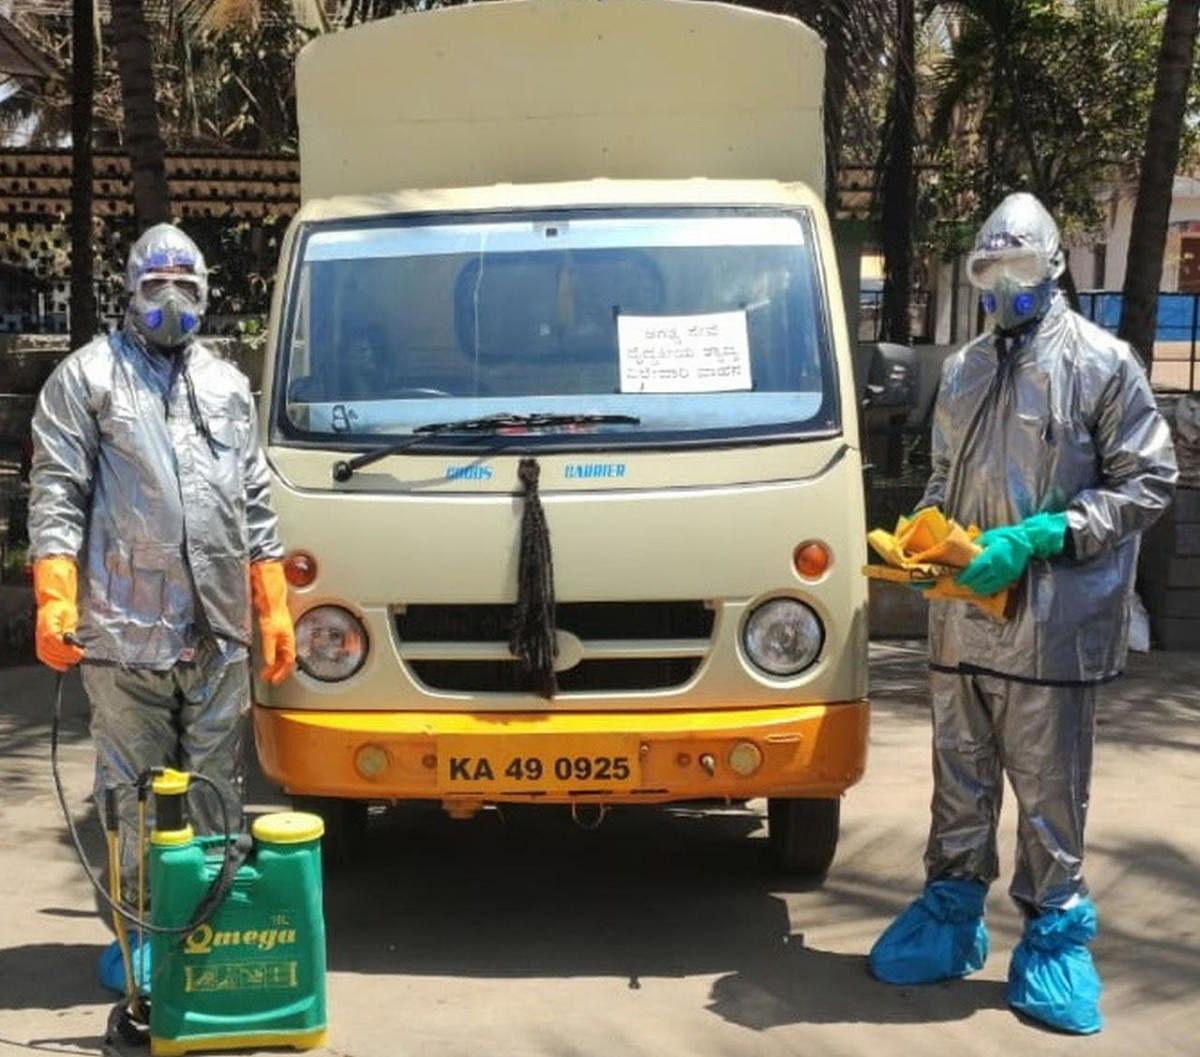 Hubballi-Dharwad Corporation has deployed a special team of civic workers with safety gears to collect waste from homes in which people are under quarantine